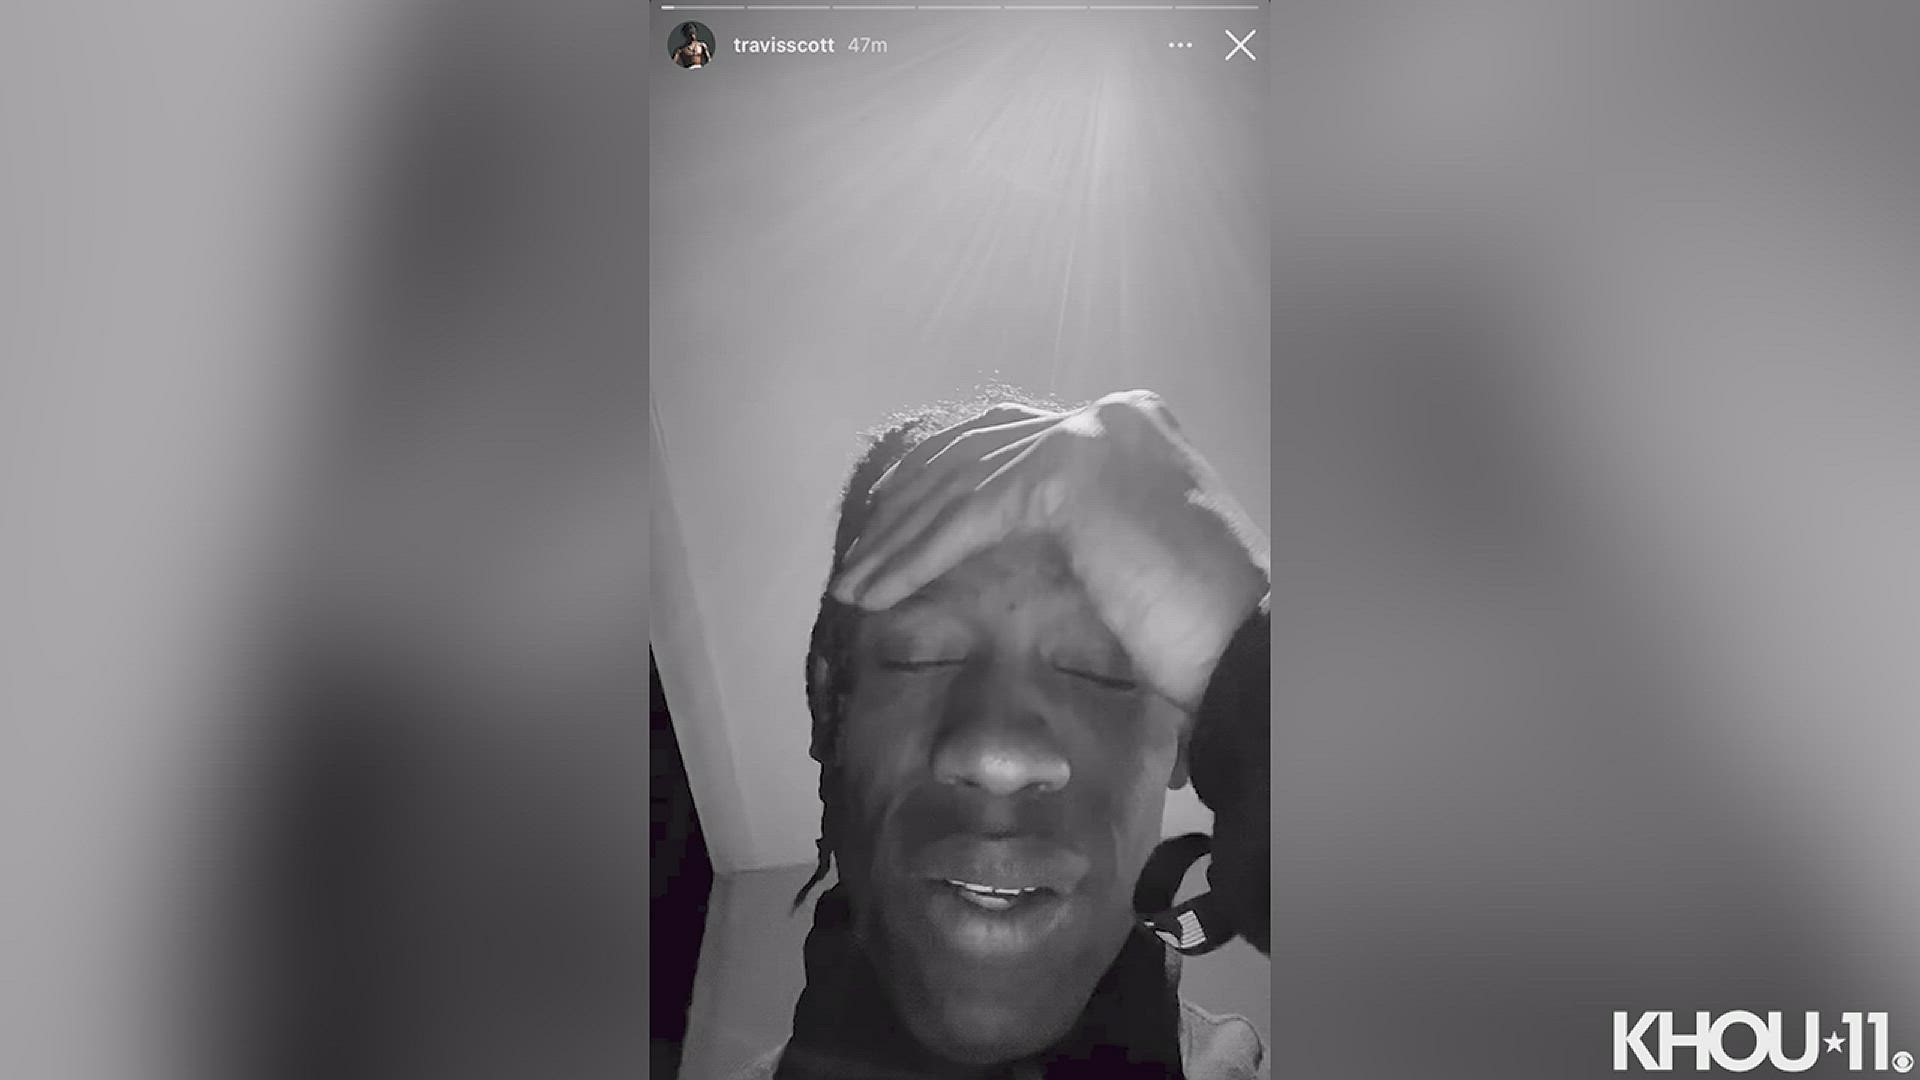 Travis Scott expressed his condolences and also said he's trying to identify the victims' families to help them through the tough time.